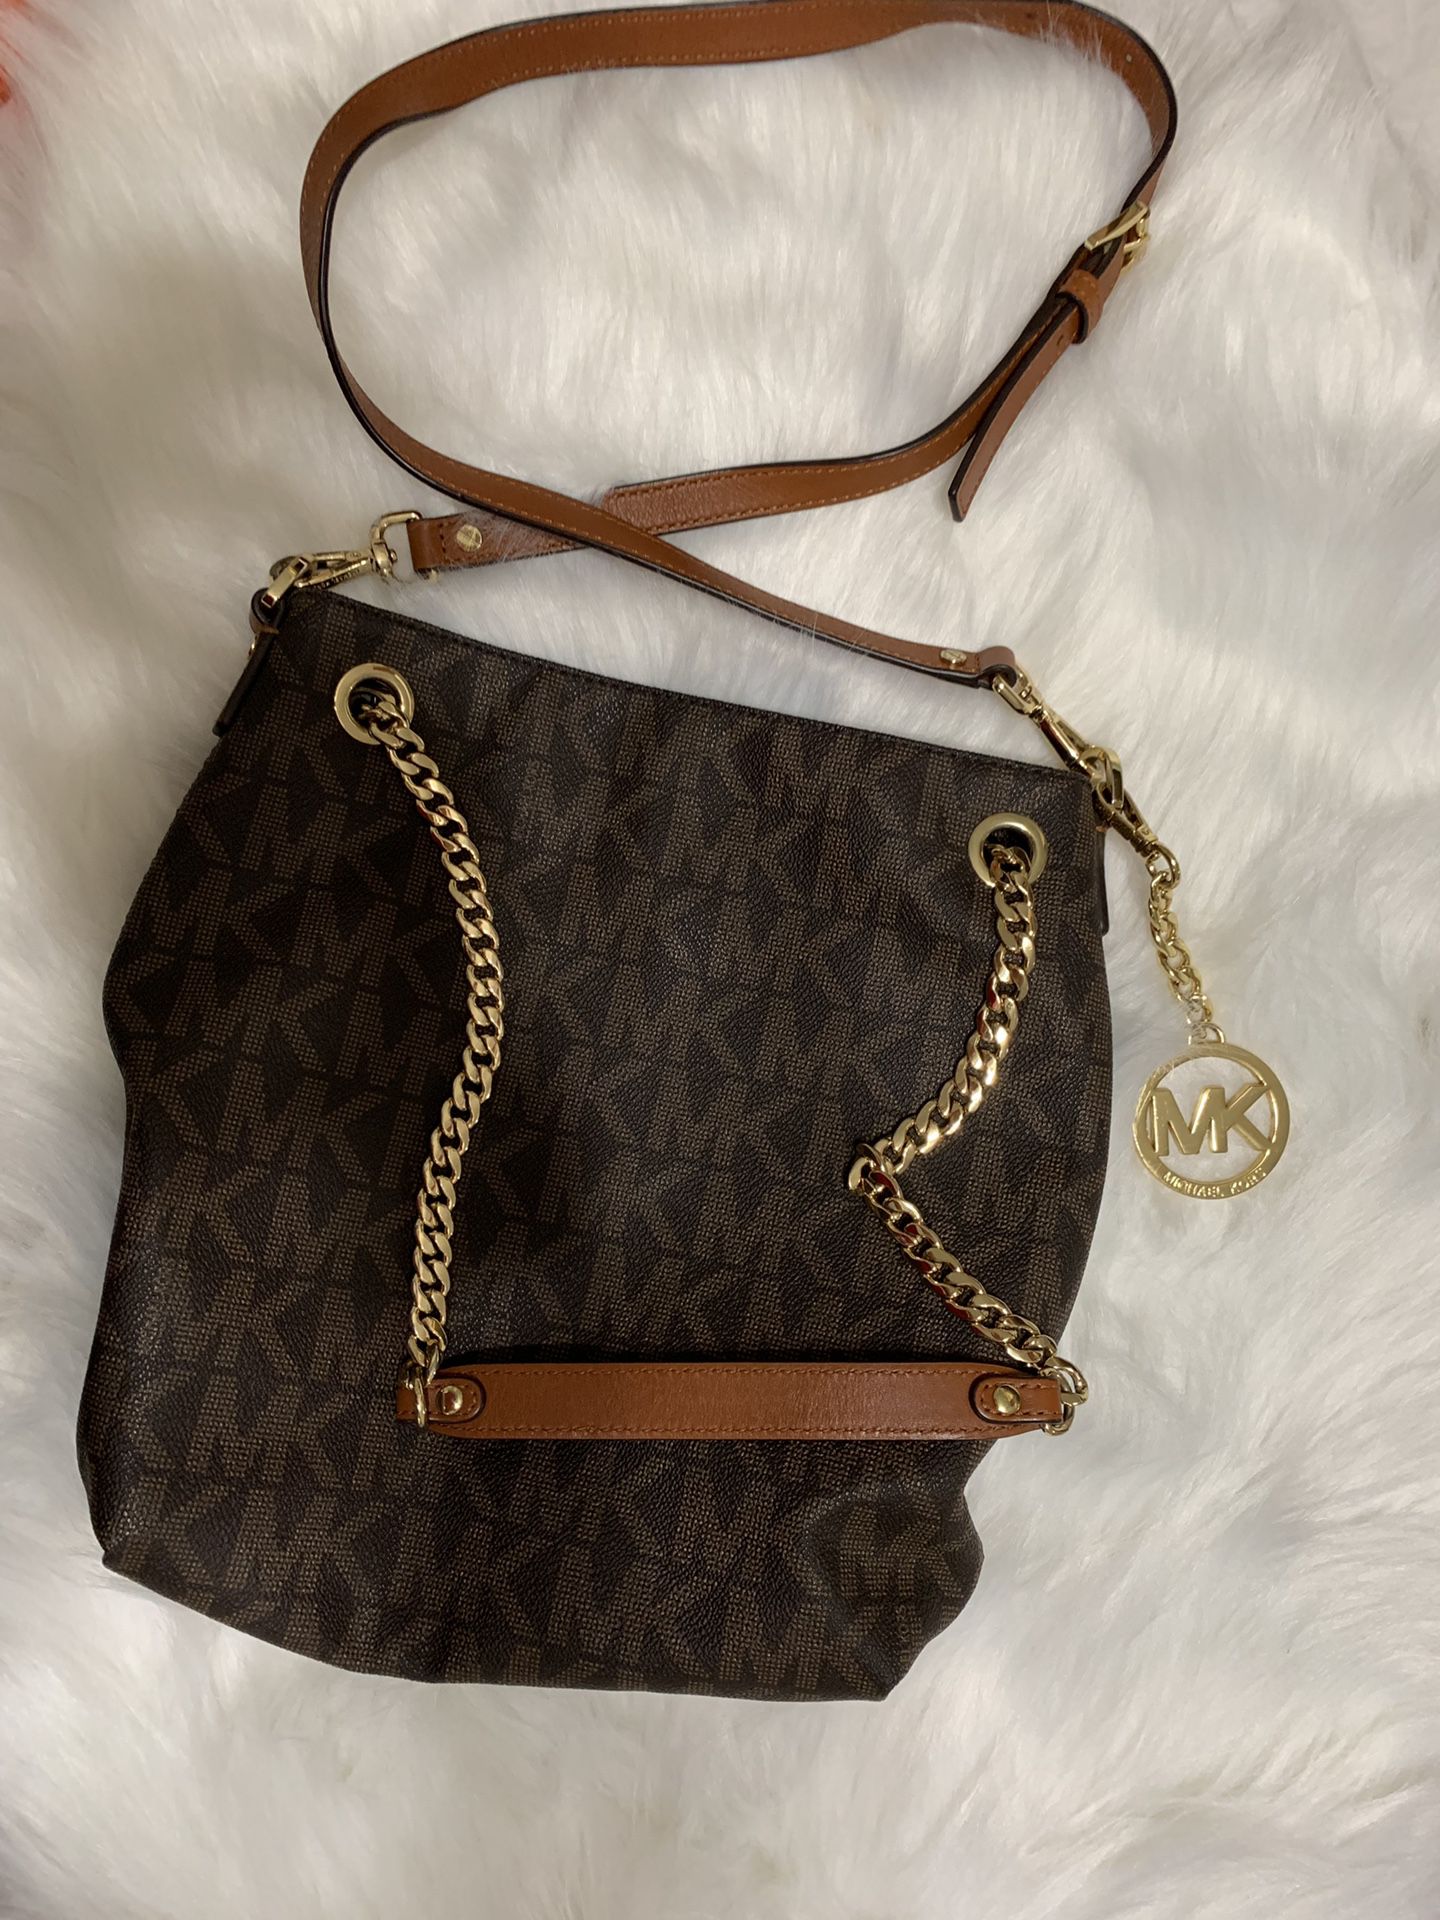 Michael Kors purse and wallet from Dillards for Sale in Katy, TX